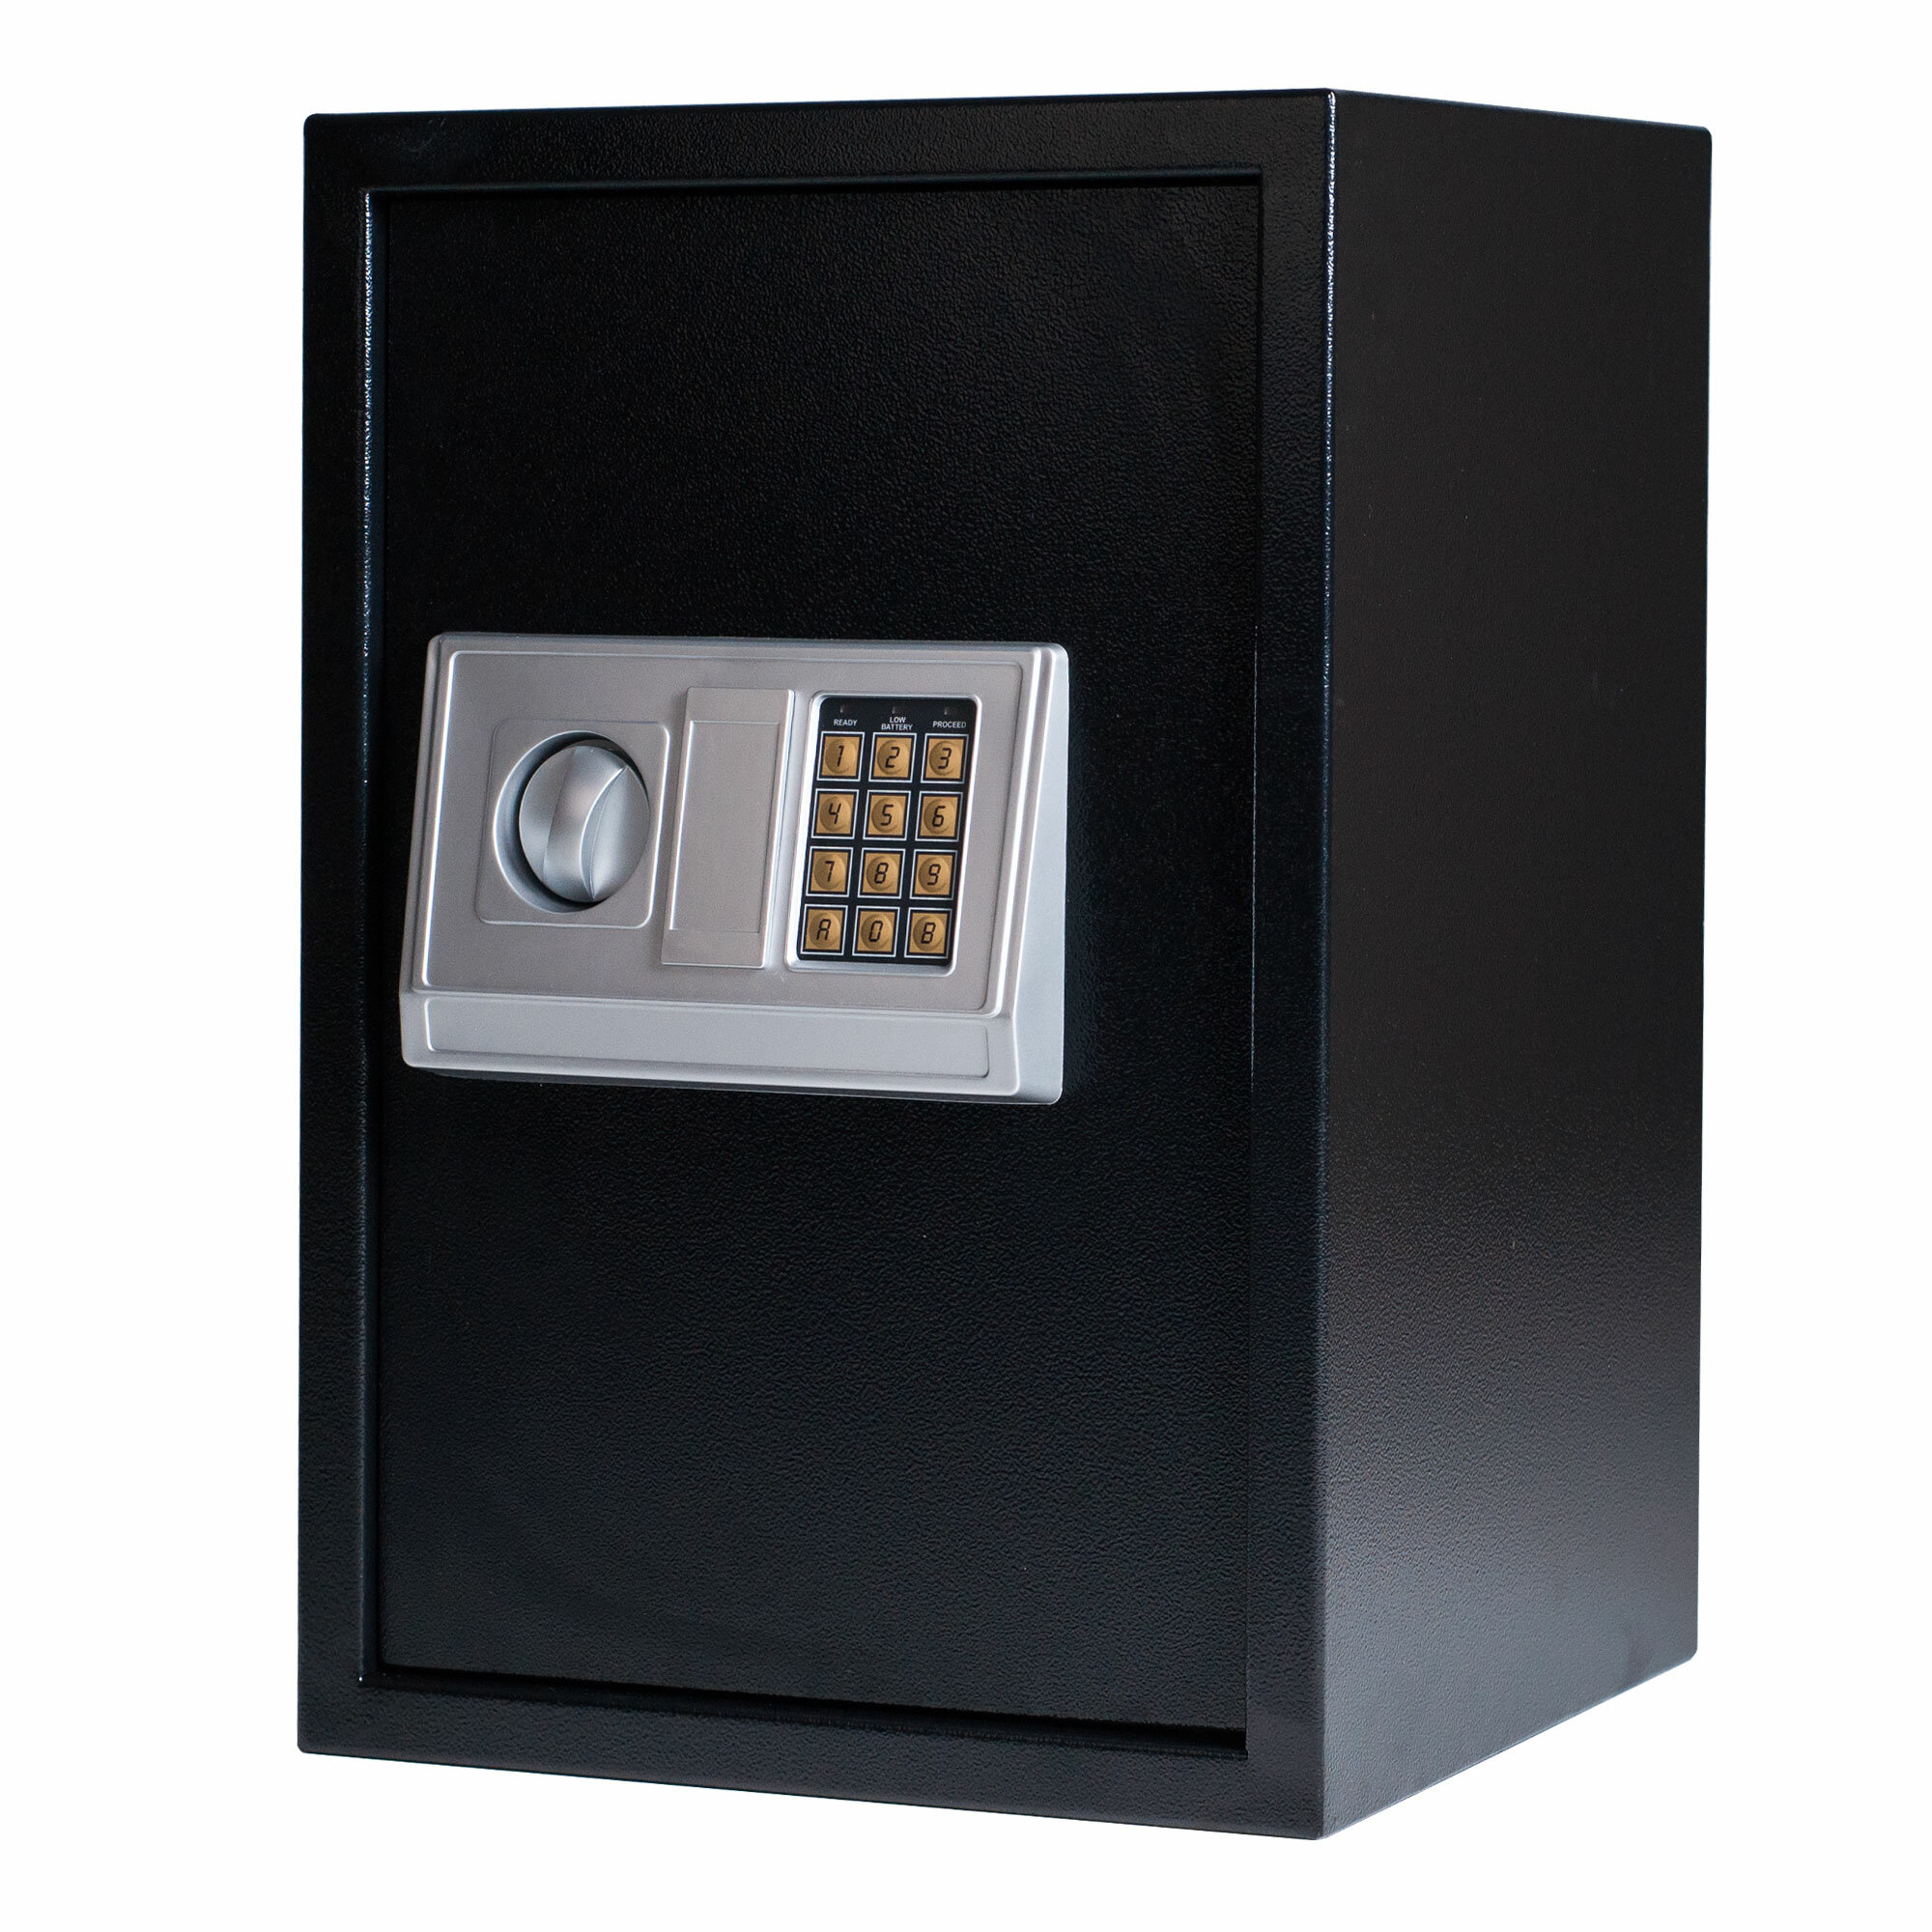 Stalwart Digital Safe Electronic Steel Safe with Keypad Protects  Valuables Home, Business  Reviews Wayfair